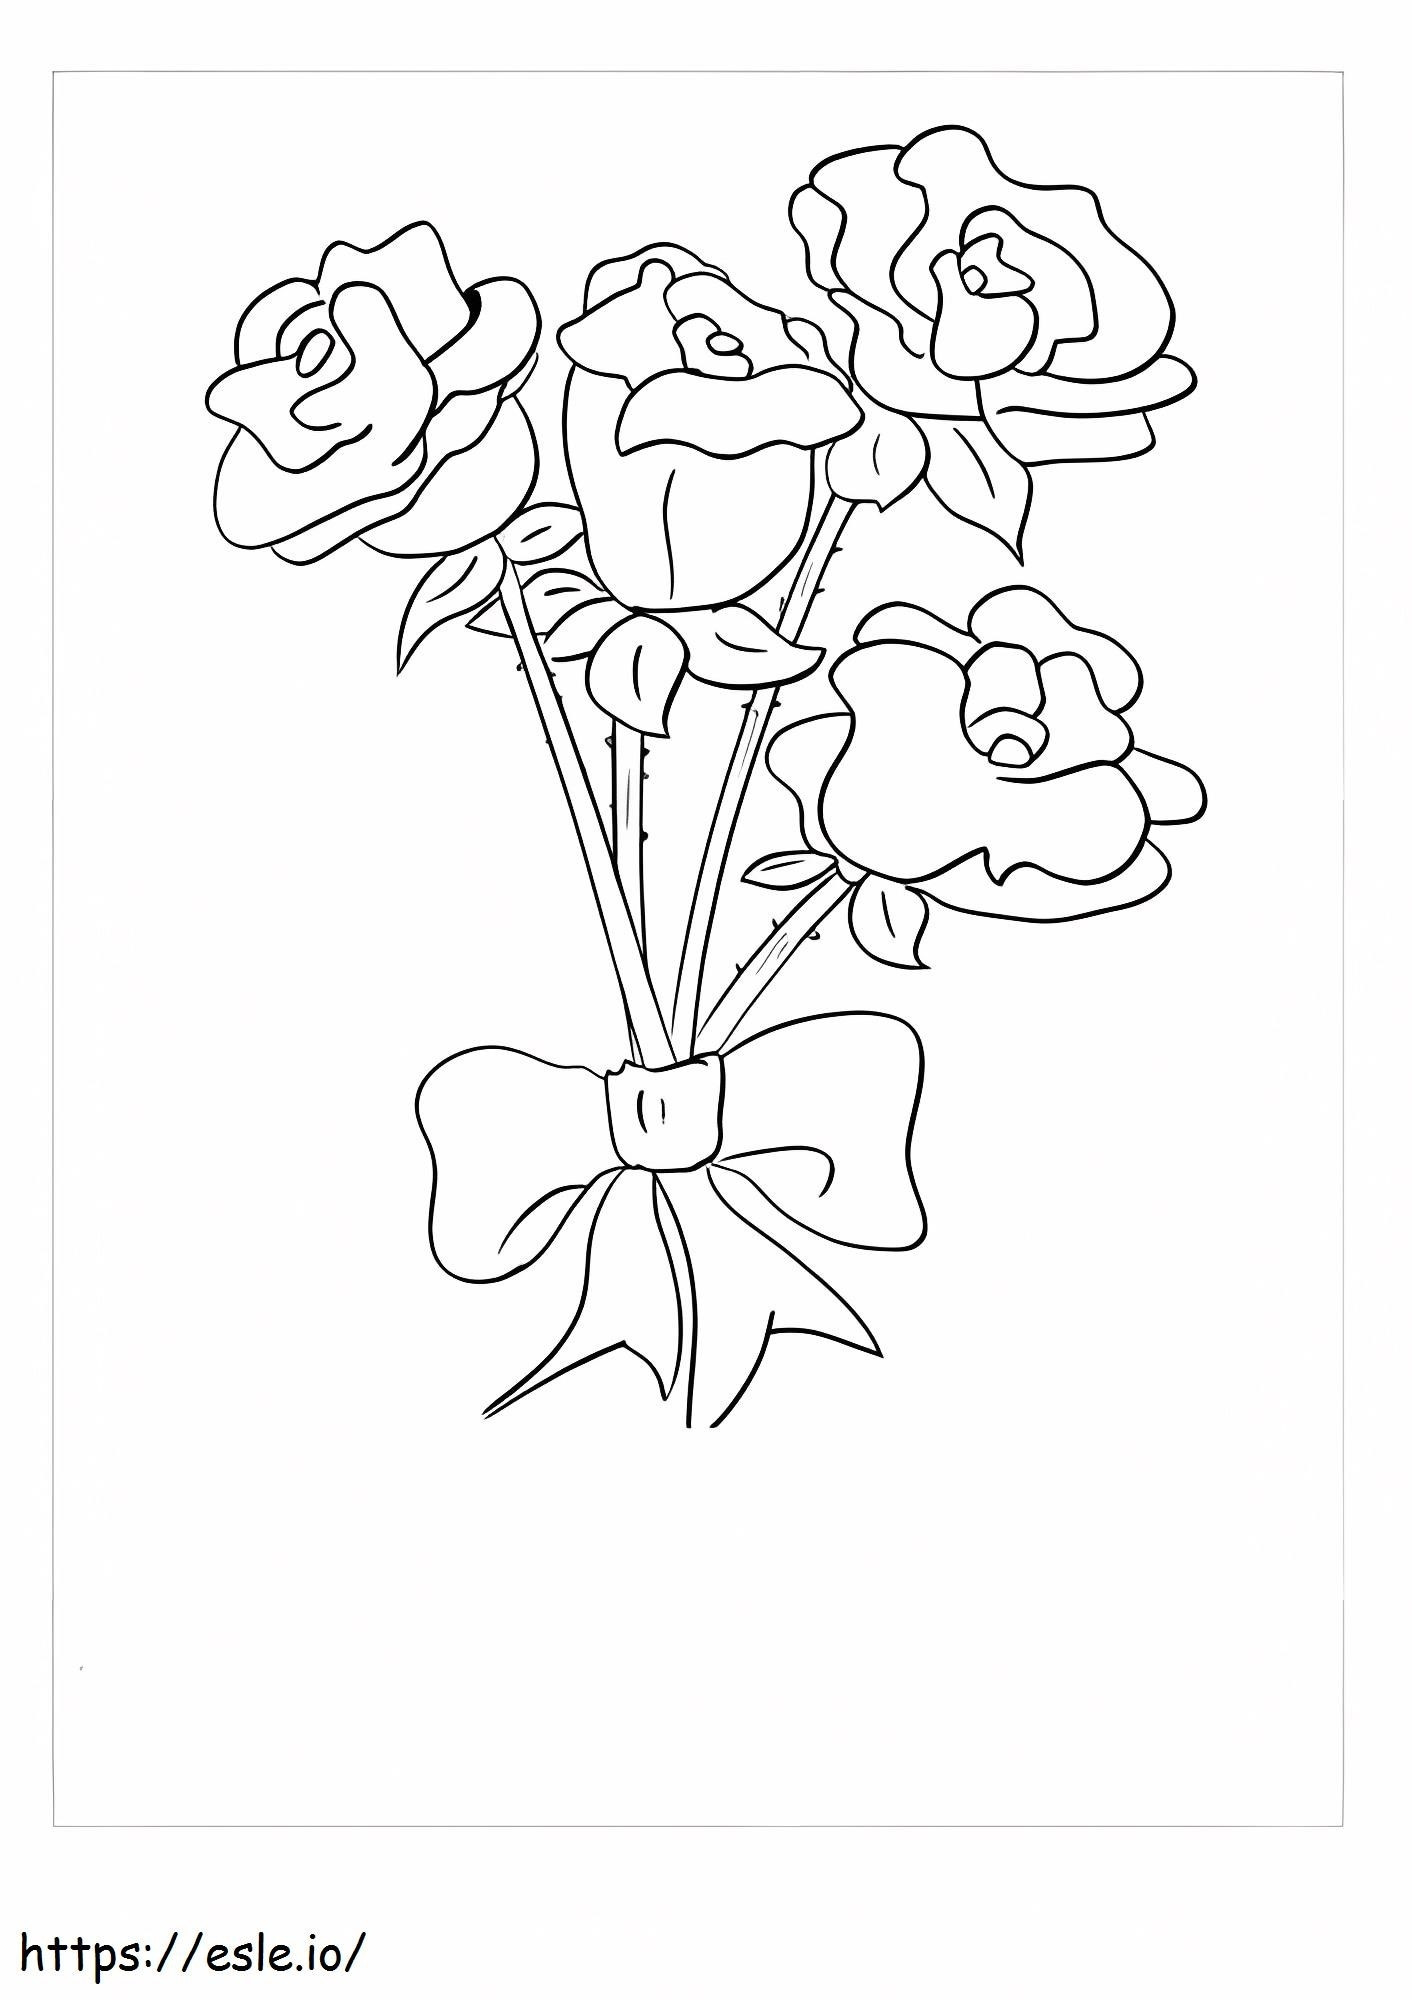 Trillium With Best Friends coloring page